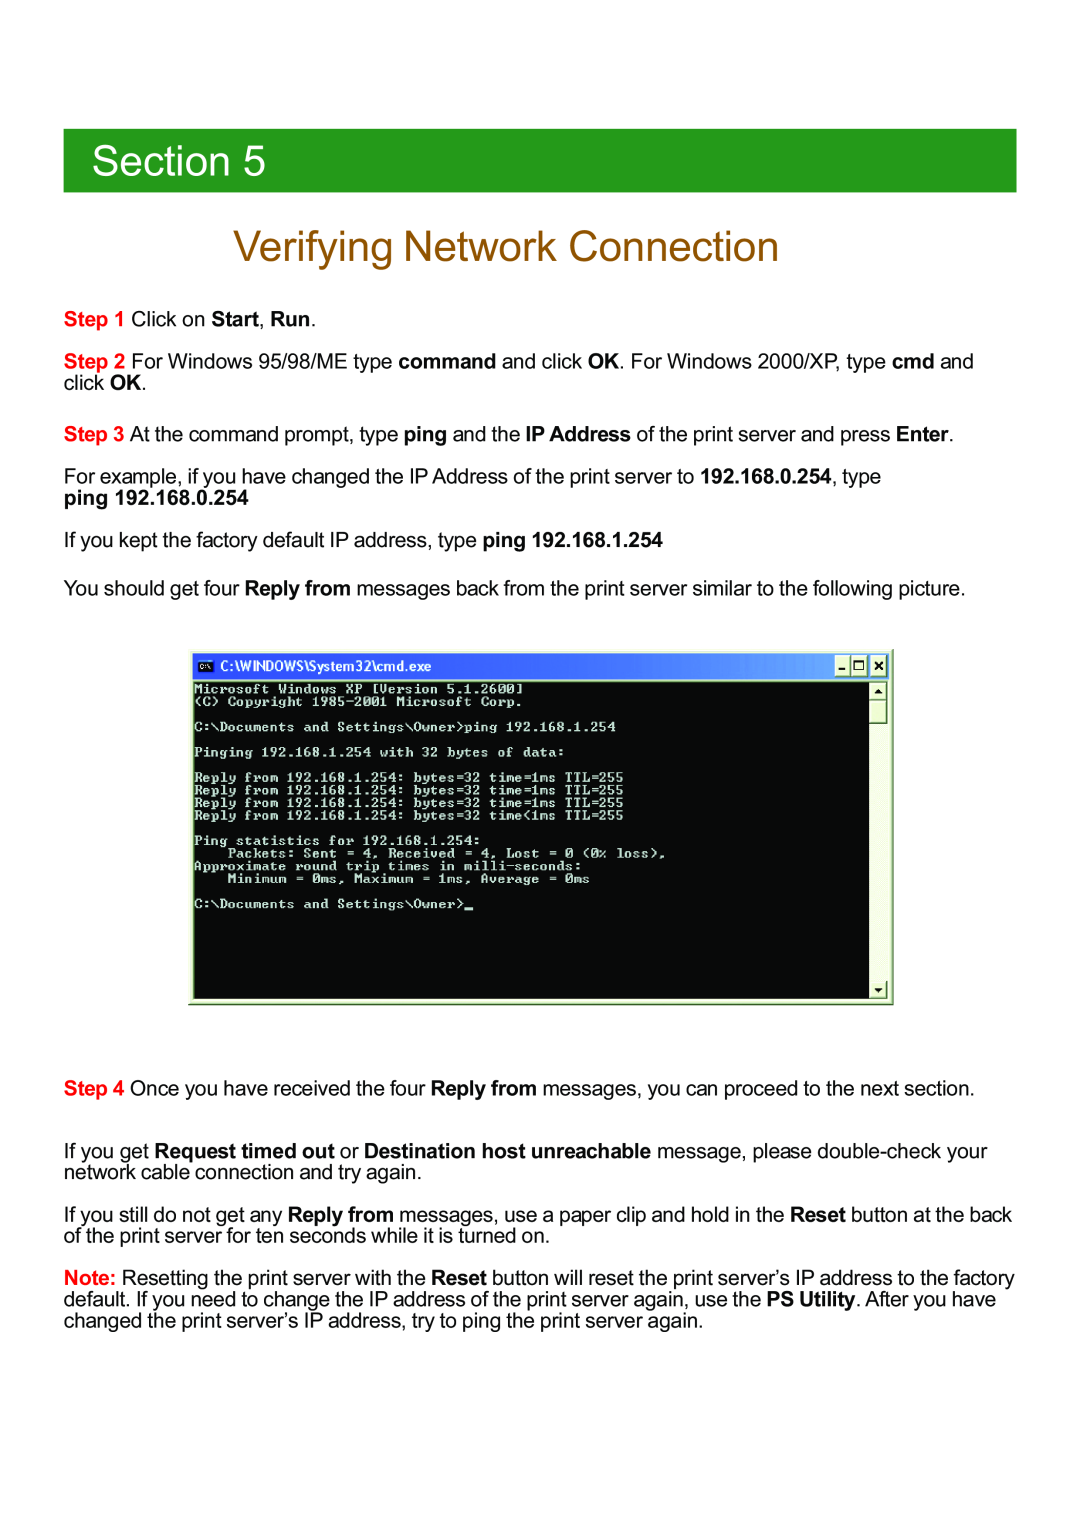 Airlink APSUSB201W manual Verifying Network Connection, Section 